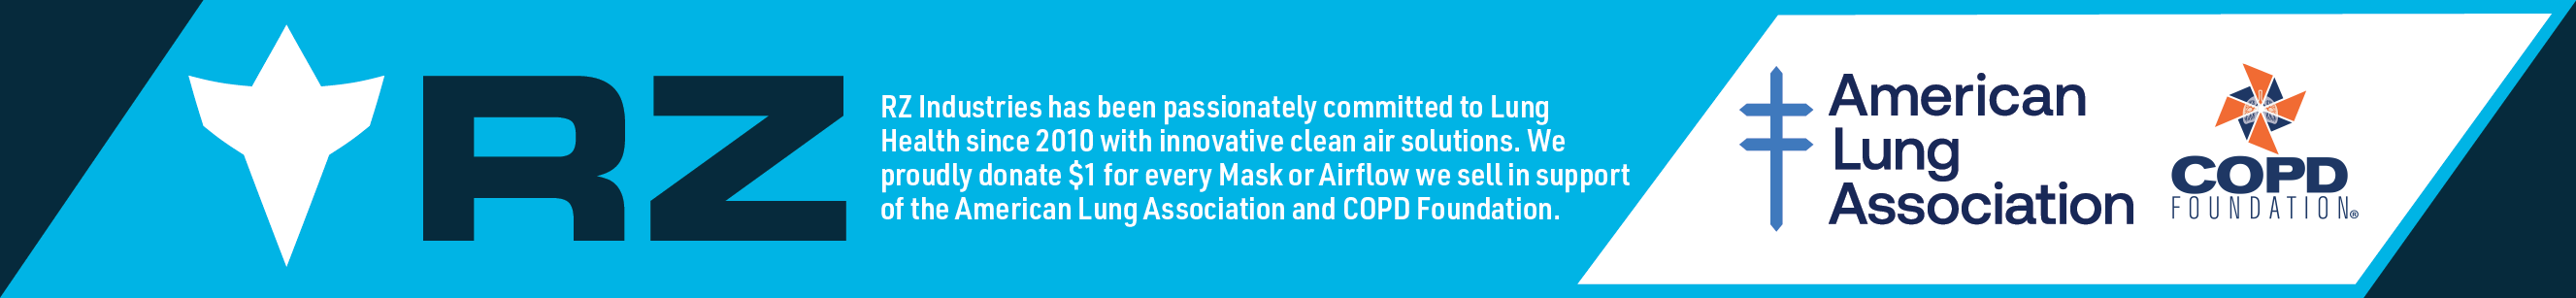 RZ Industries supports the American Lung Association and the COPD Foundation by proudly donating 1$ for every mask or airflow that we sell.